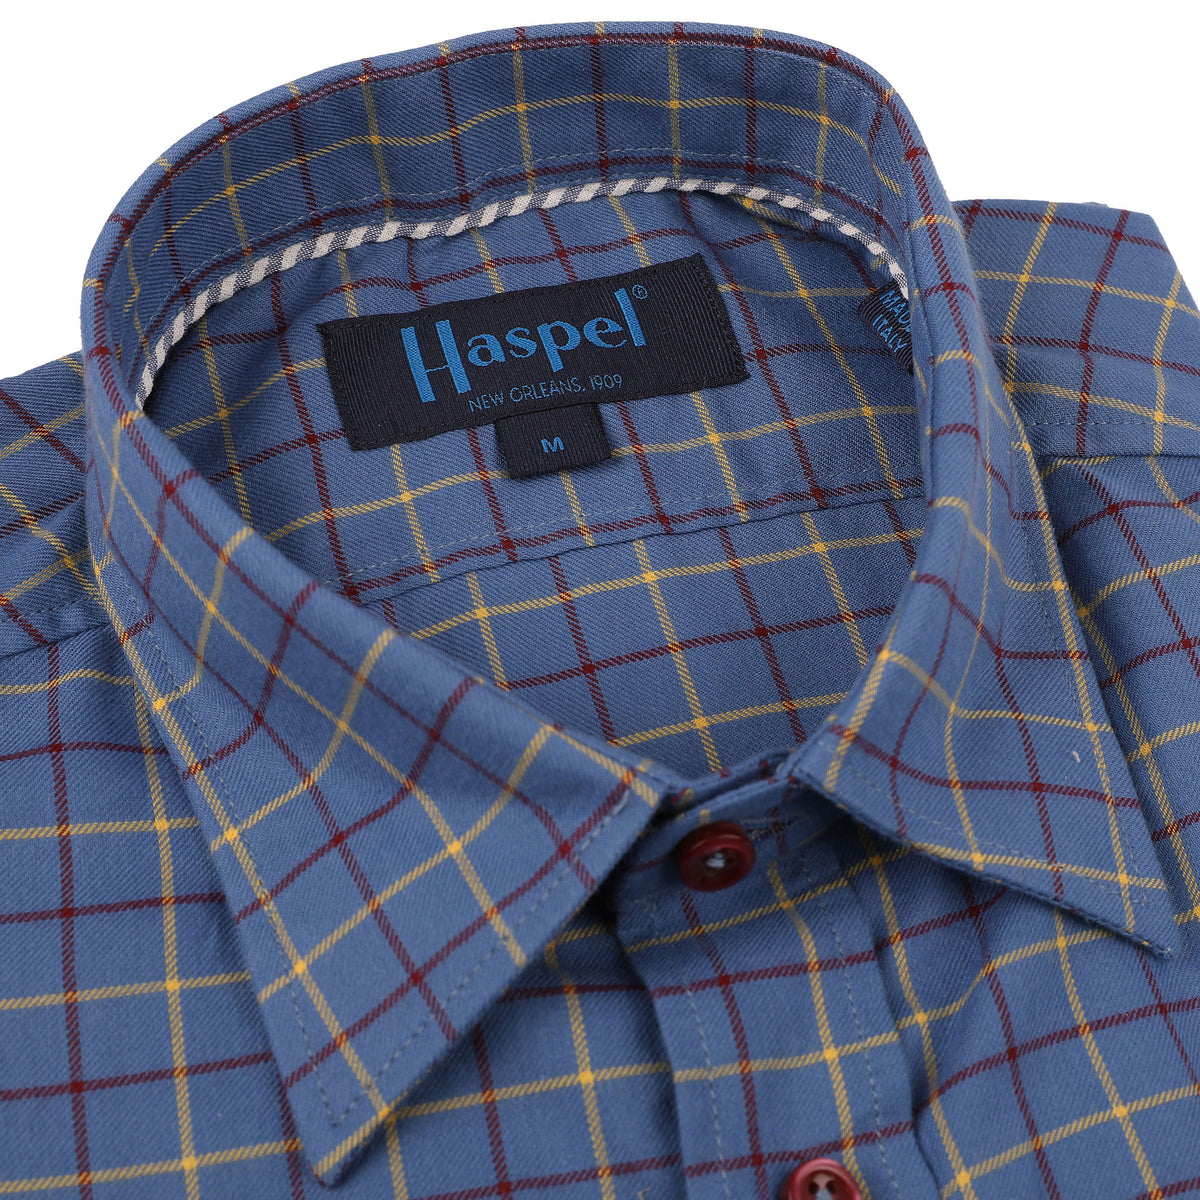 Our Treme Blue with Burgundy &amp; Yellow Brushed Check is a stylish option for fall. The brushed check pattern mixes the cool blue hue with warm burgundy and yellow tones, creating a look that is both sophisticated and modern.  100% Cotton • Hidden Button Collar • Long Sleeve • Chest Pocket • Machine Washable • Made in Italy • Return Policy